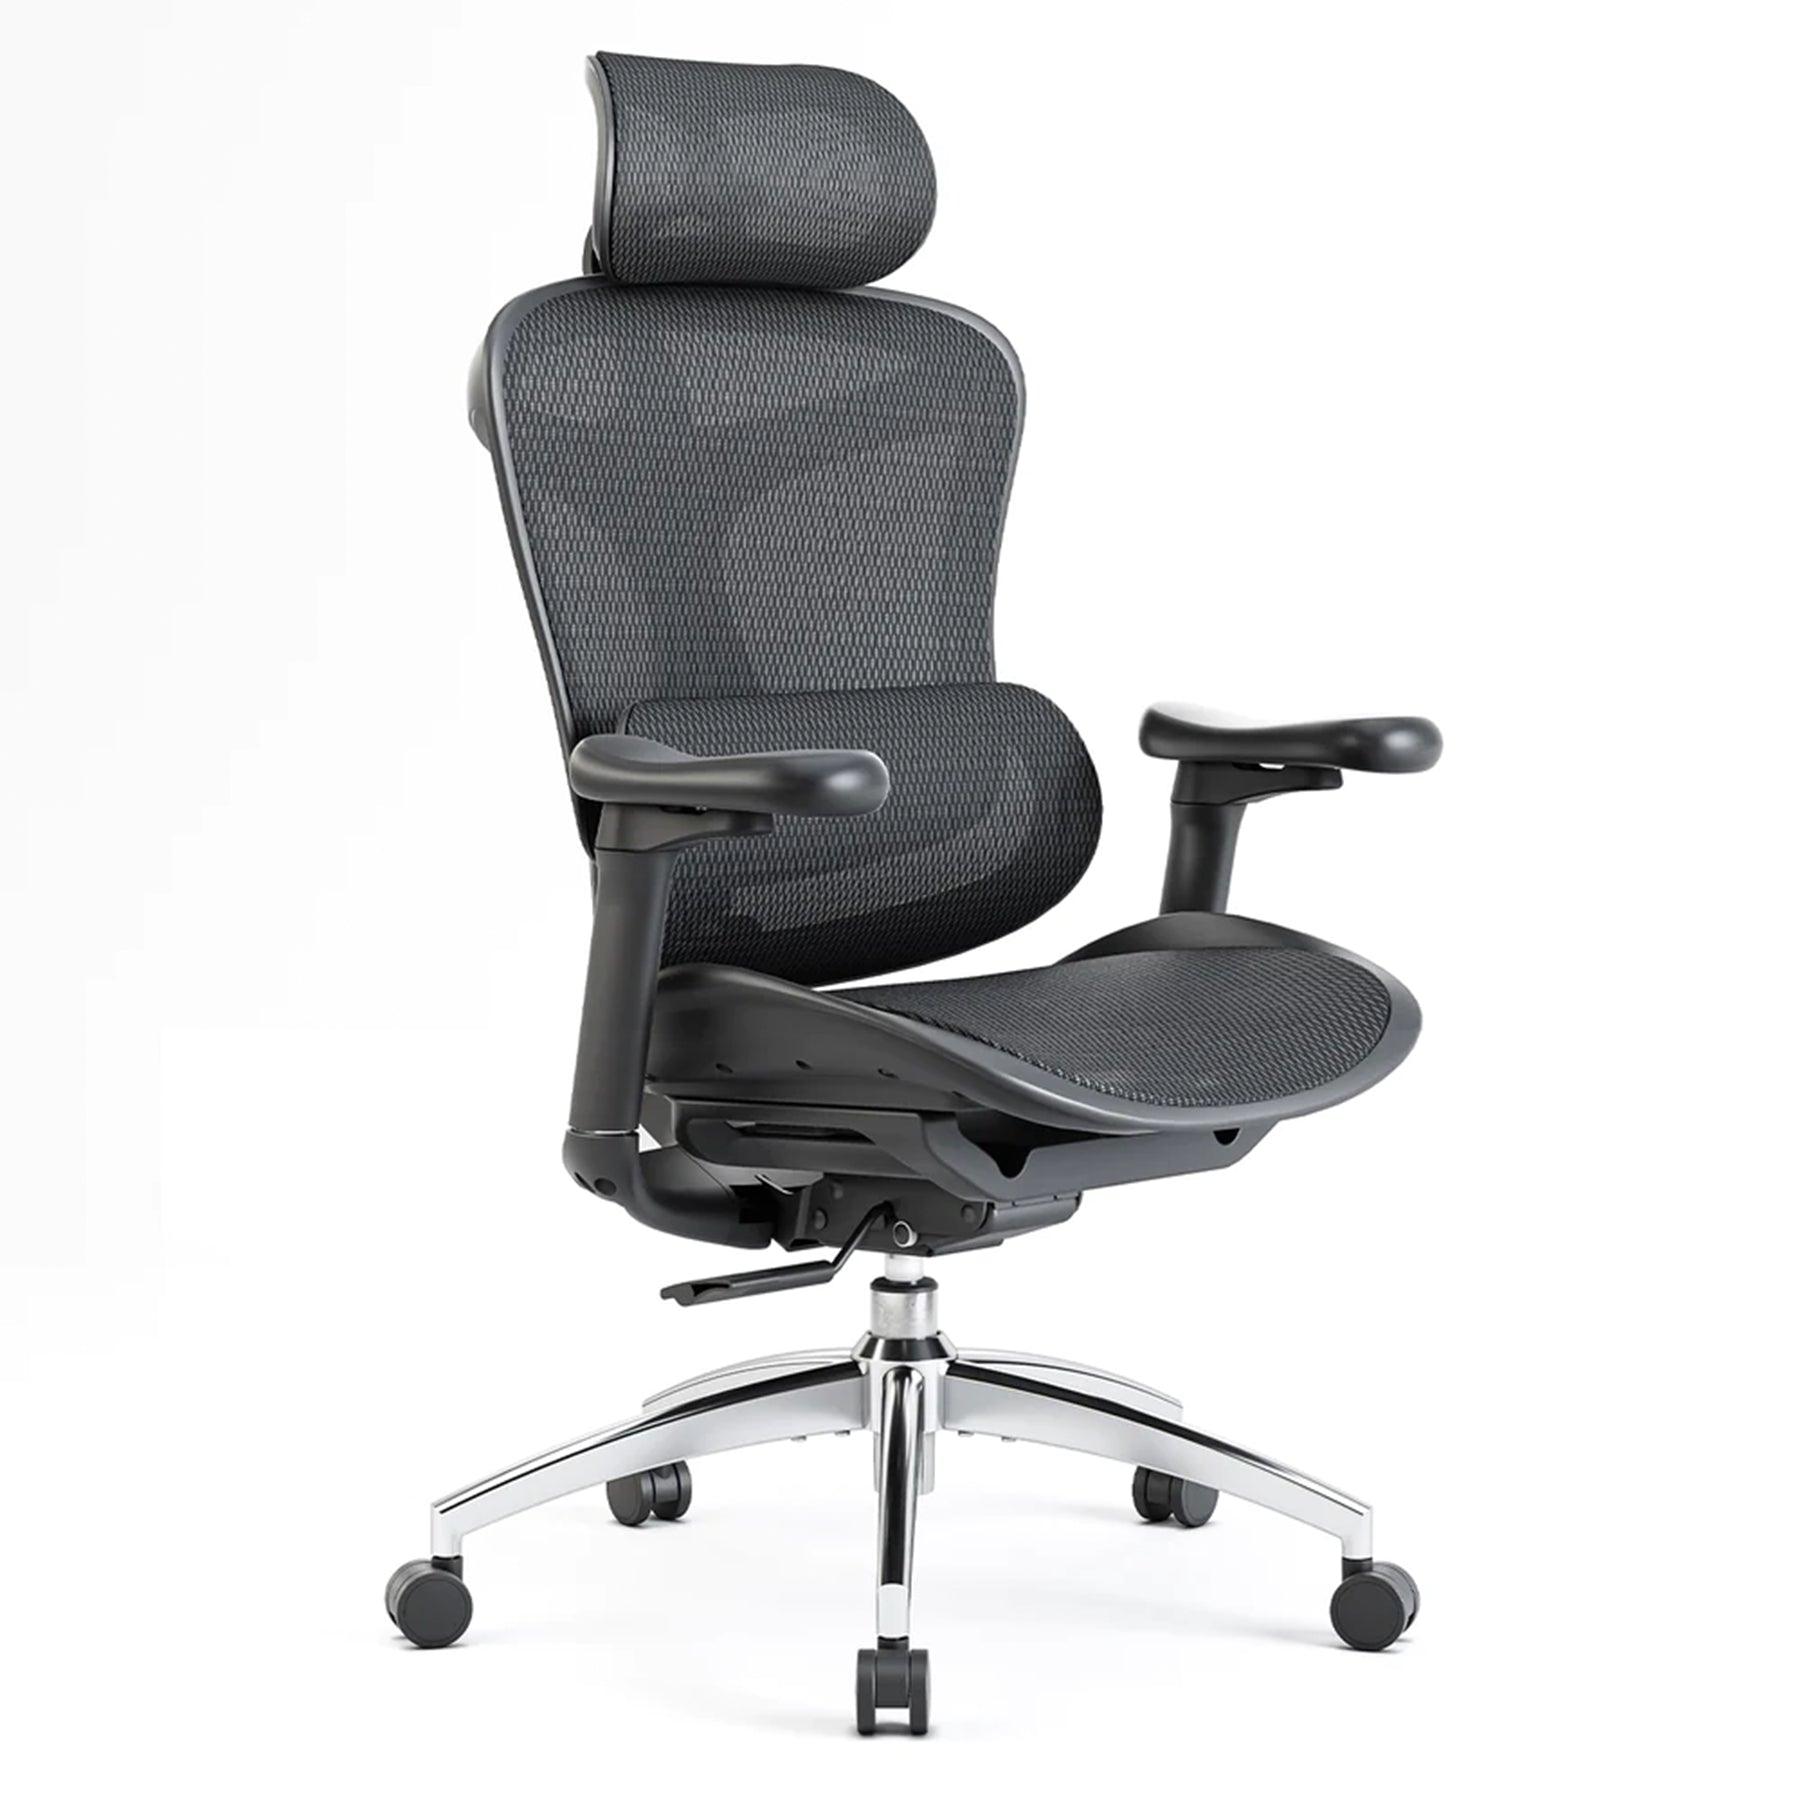 Sihoo's Doro-C300 Office Chair Is An Affordable Alternative To